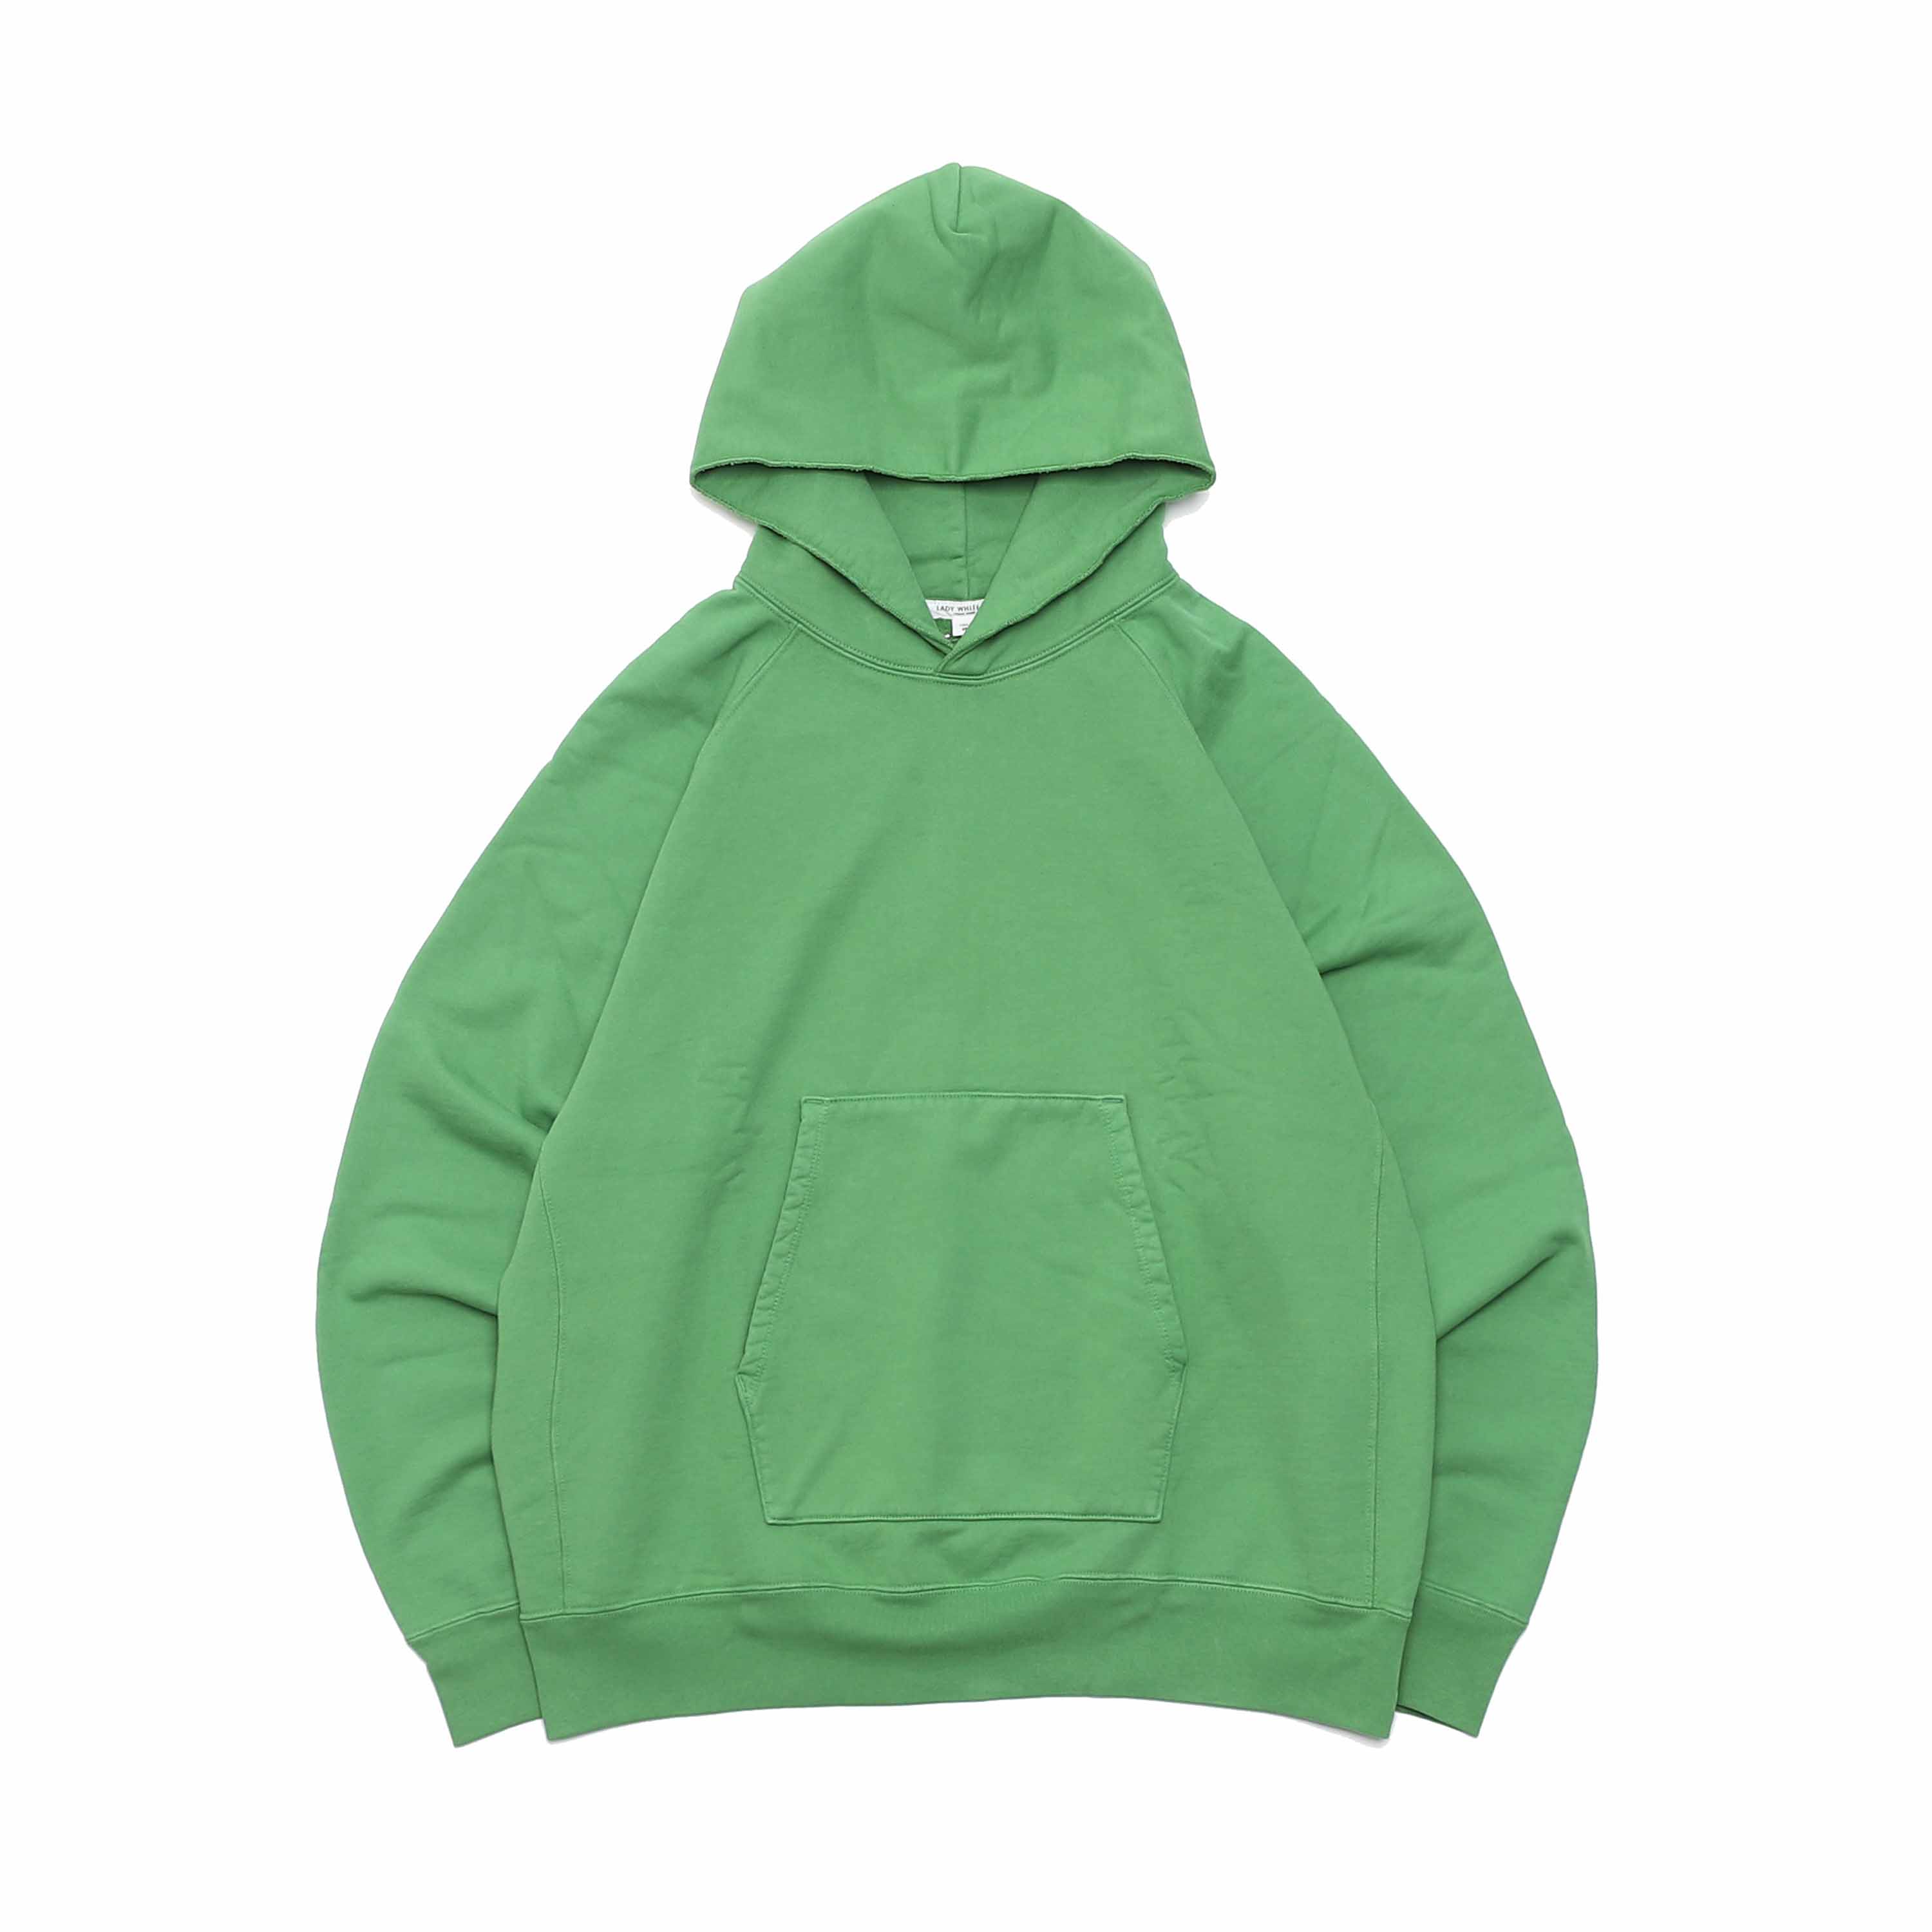 SUPER WEIGHTED HOODIE - BRIGHT GREEN